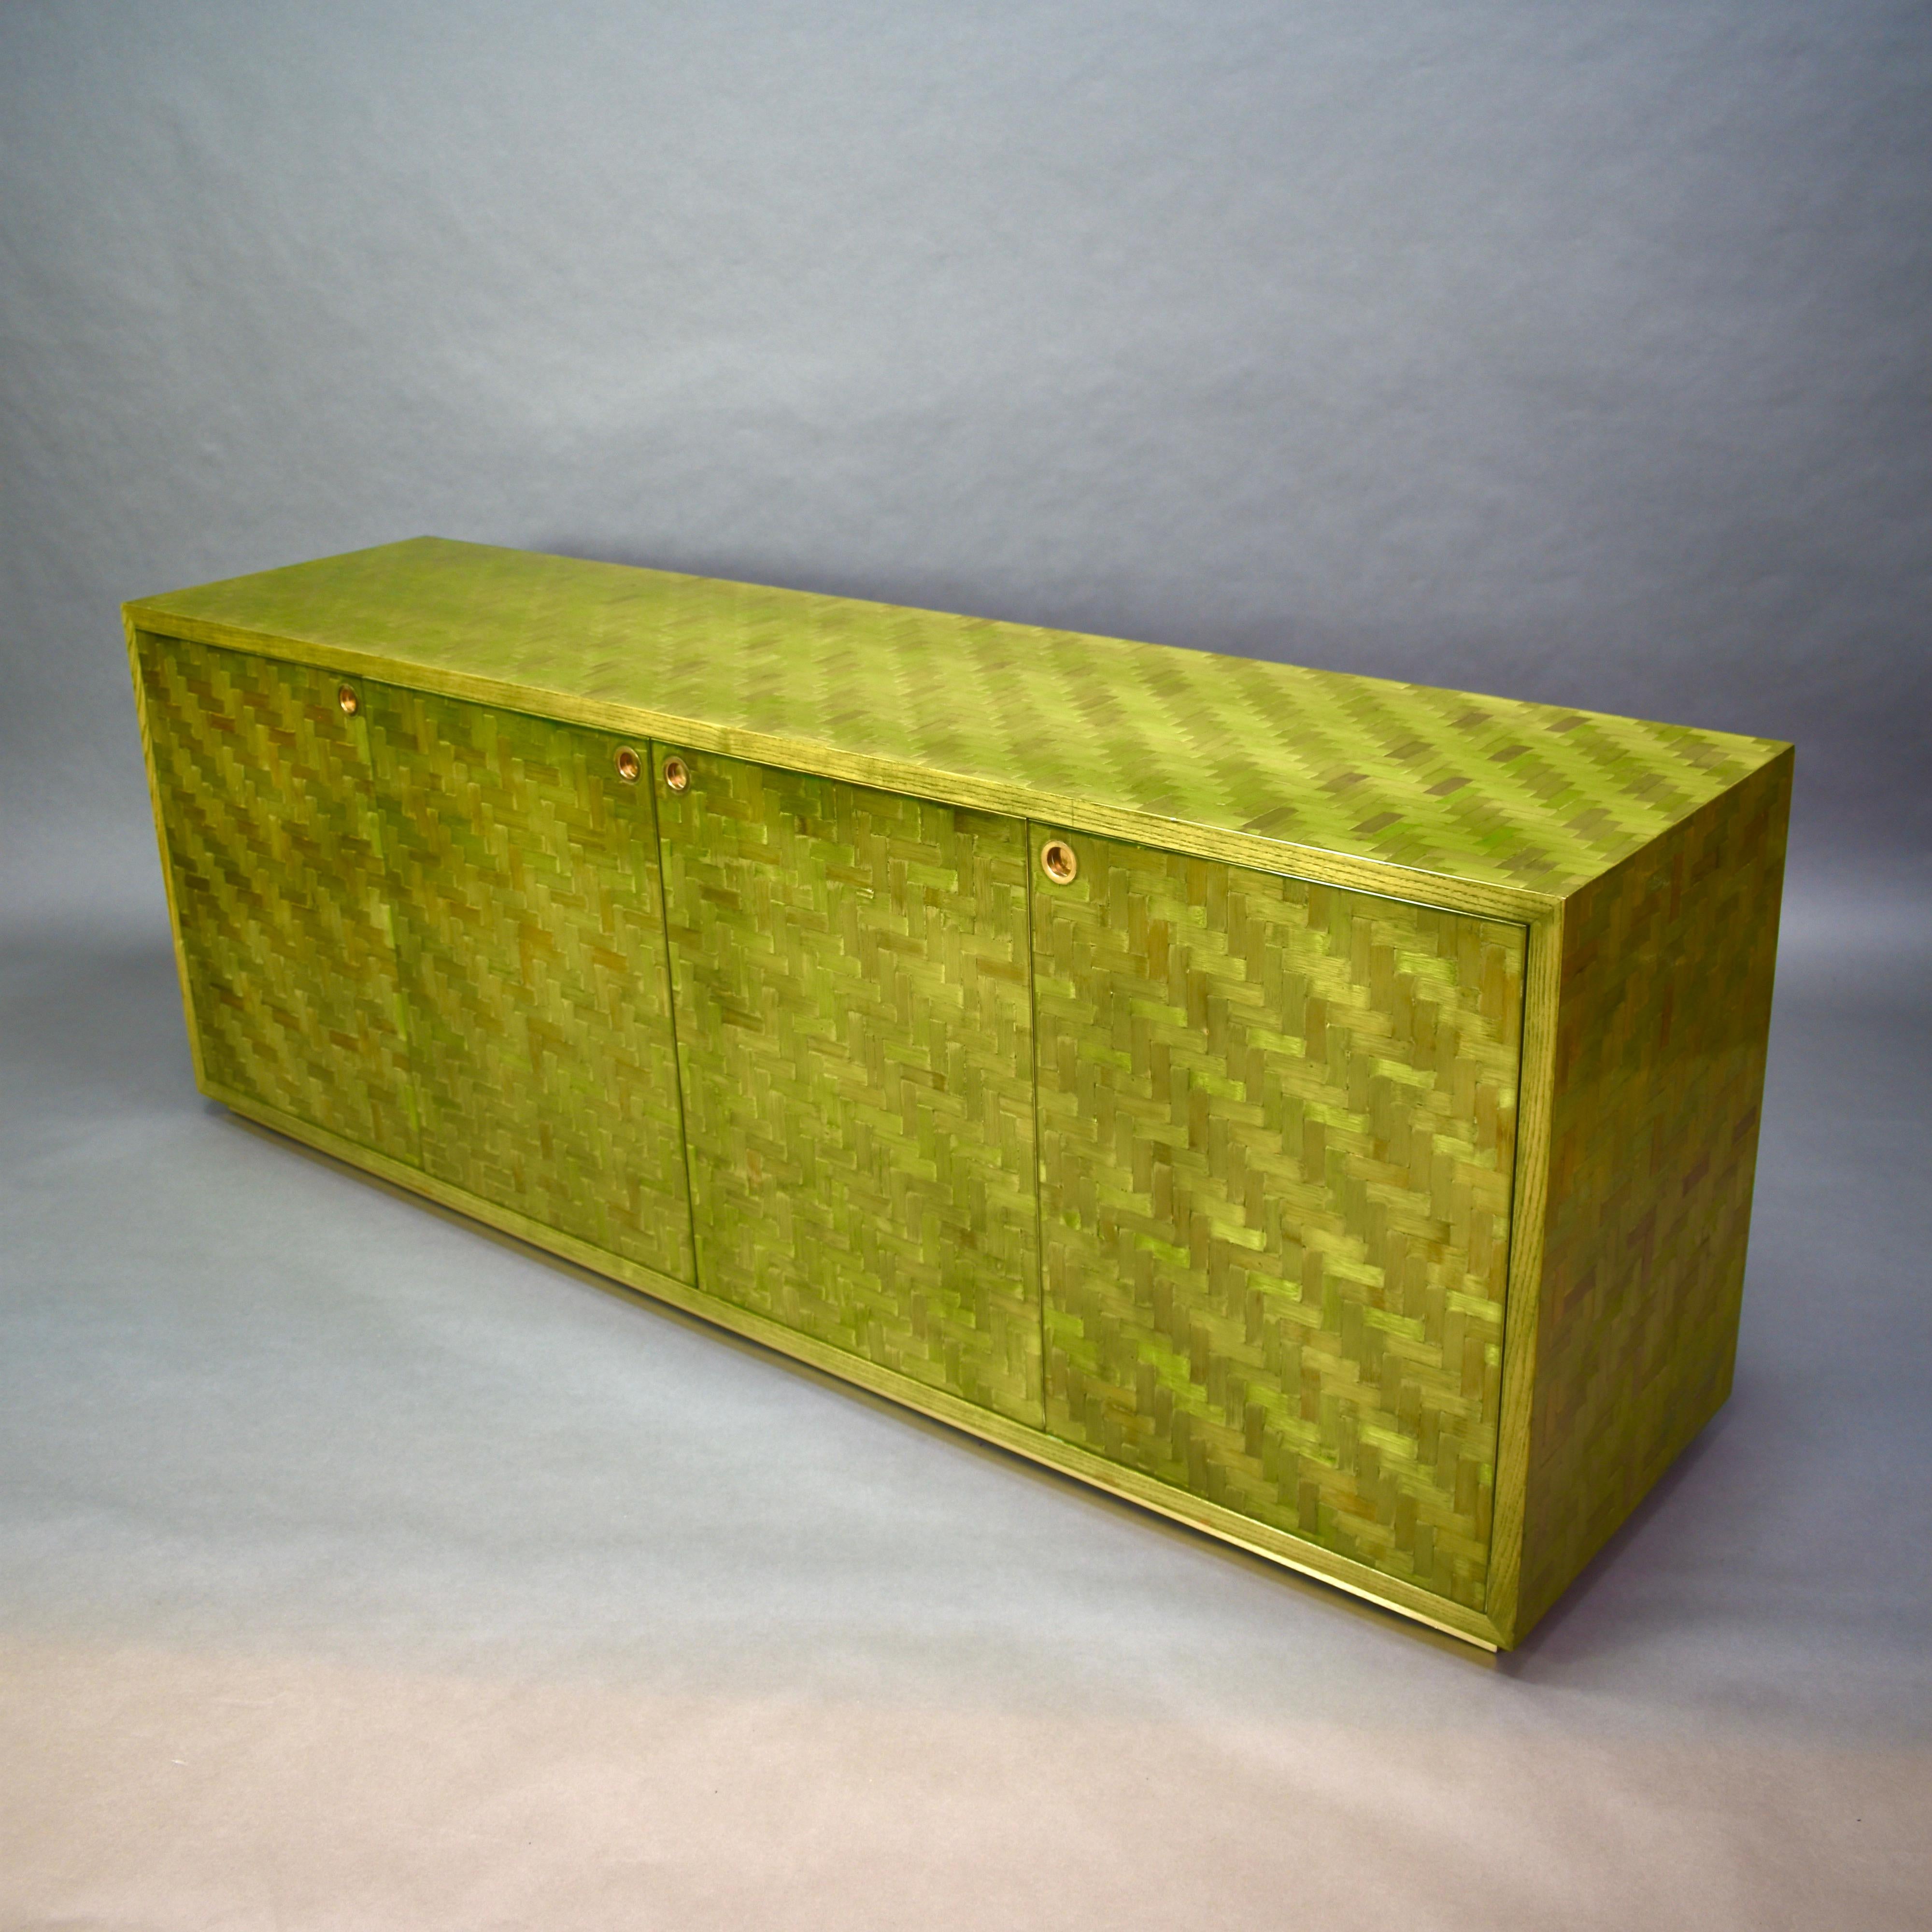 Palmwood Italian Mosaic Credenza in Green Palm Leaf and Brass by Smania, Italy circa 1970